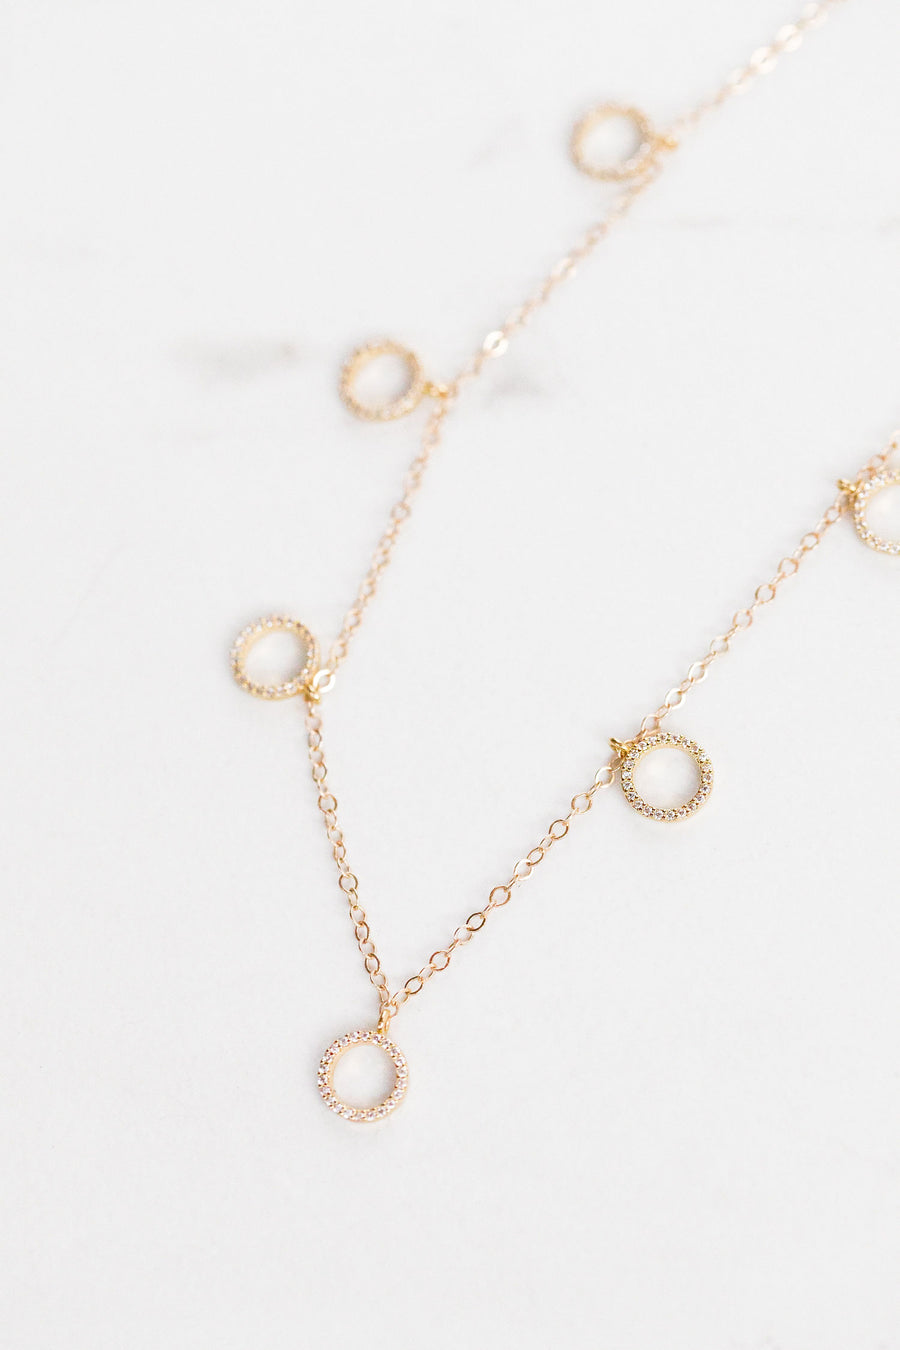 Find the perfect necklace you're looking for from Charme Silkiner! This beautiful 14K Gold Chain Necklace with Halo CZ accents is sheer perfection. Great for layering or wearing alone the Awake Necklace is the perfect piece of unique jewelry that everyone should own. 